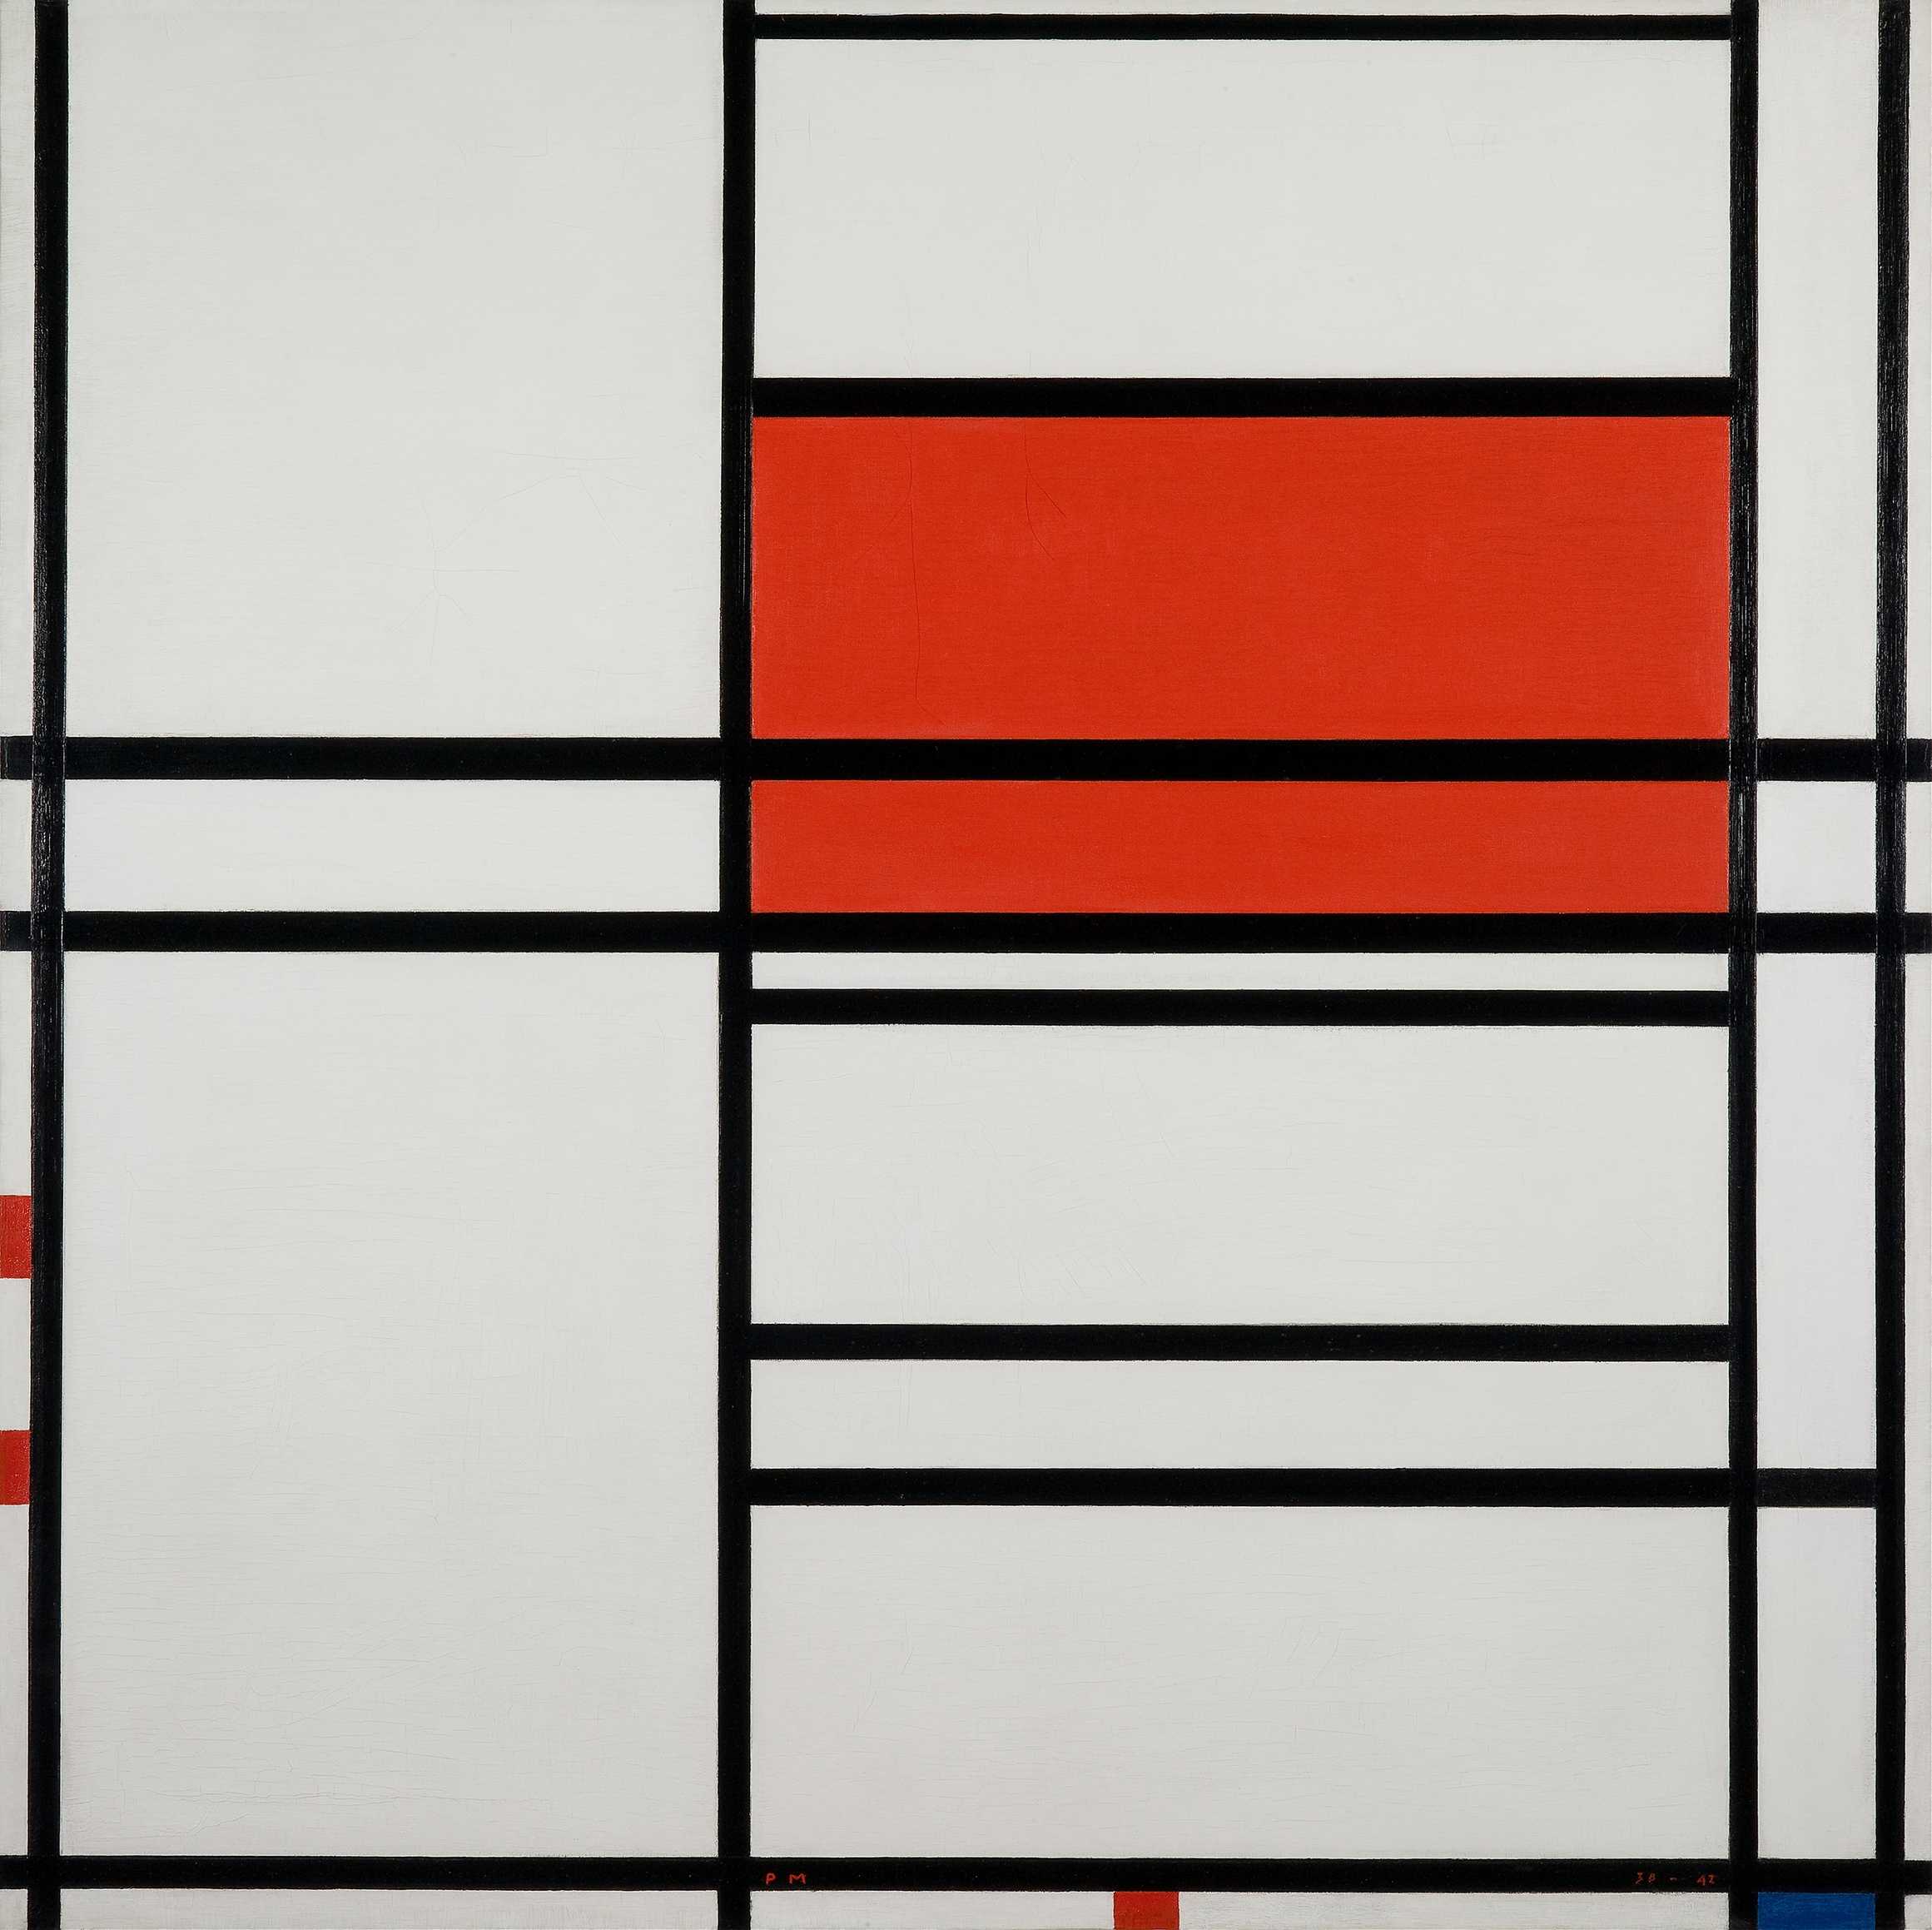 Find out more about Piet Mondrian - Composition Of Red And White